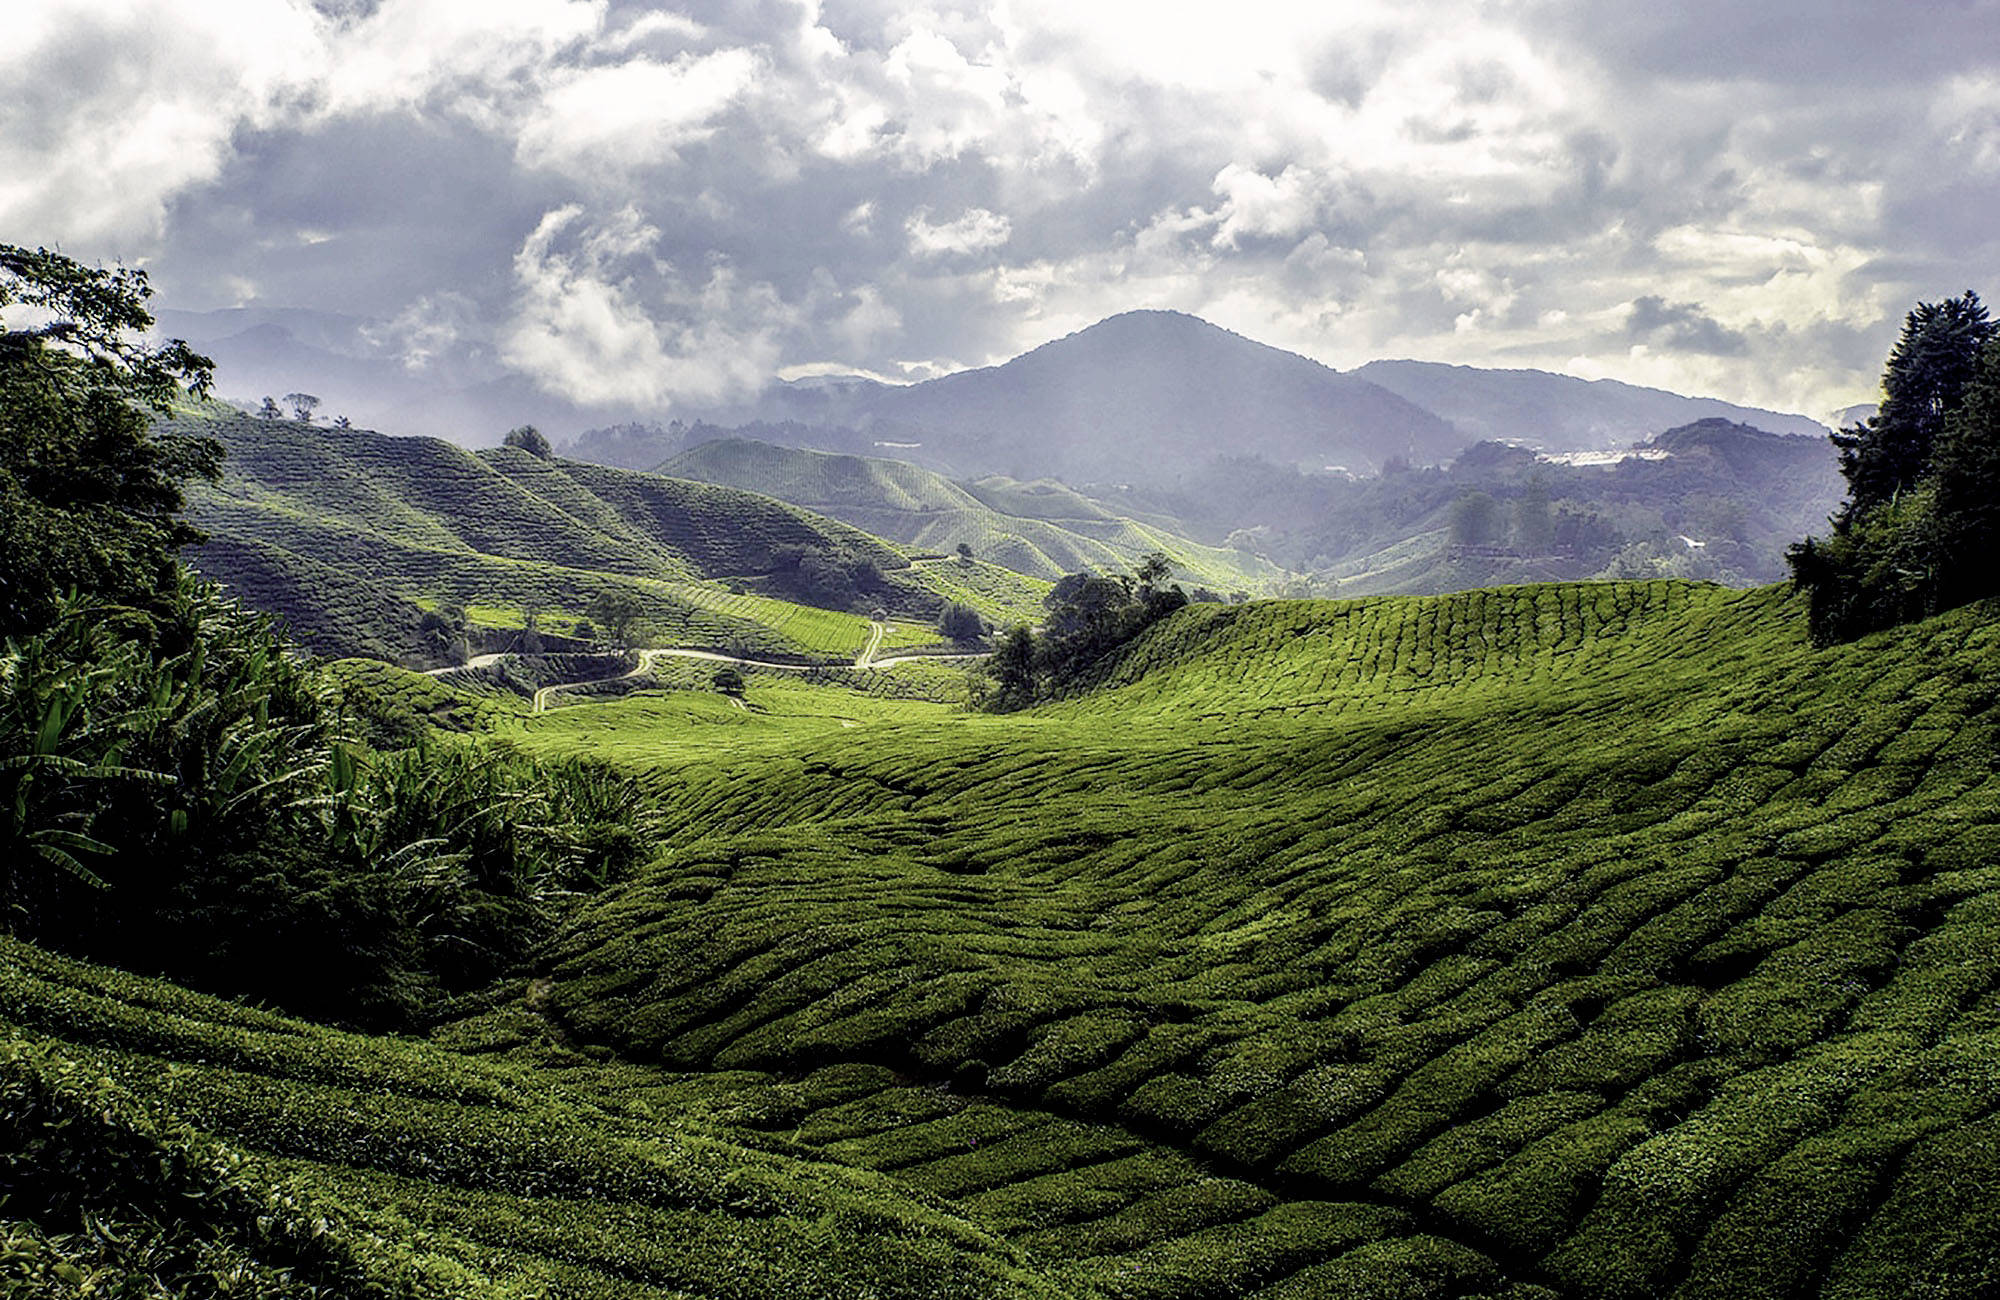 Experience cameron highlands in malaysia